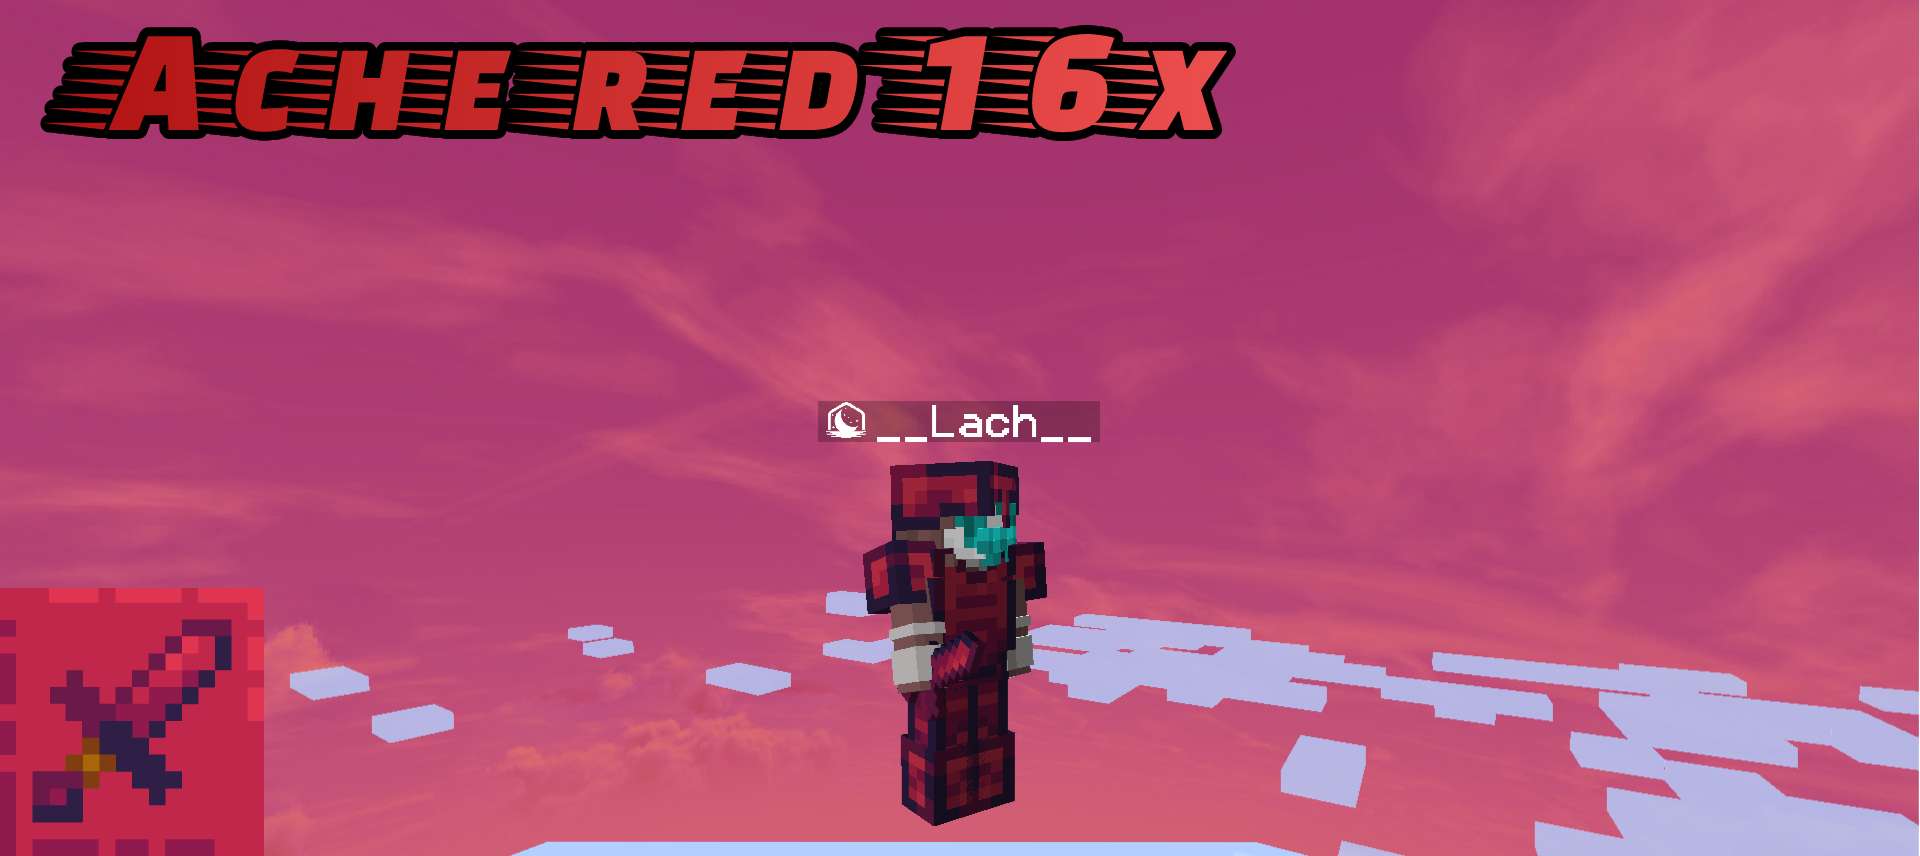 ache red 16x by lach on PvPRP